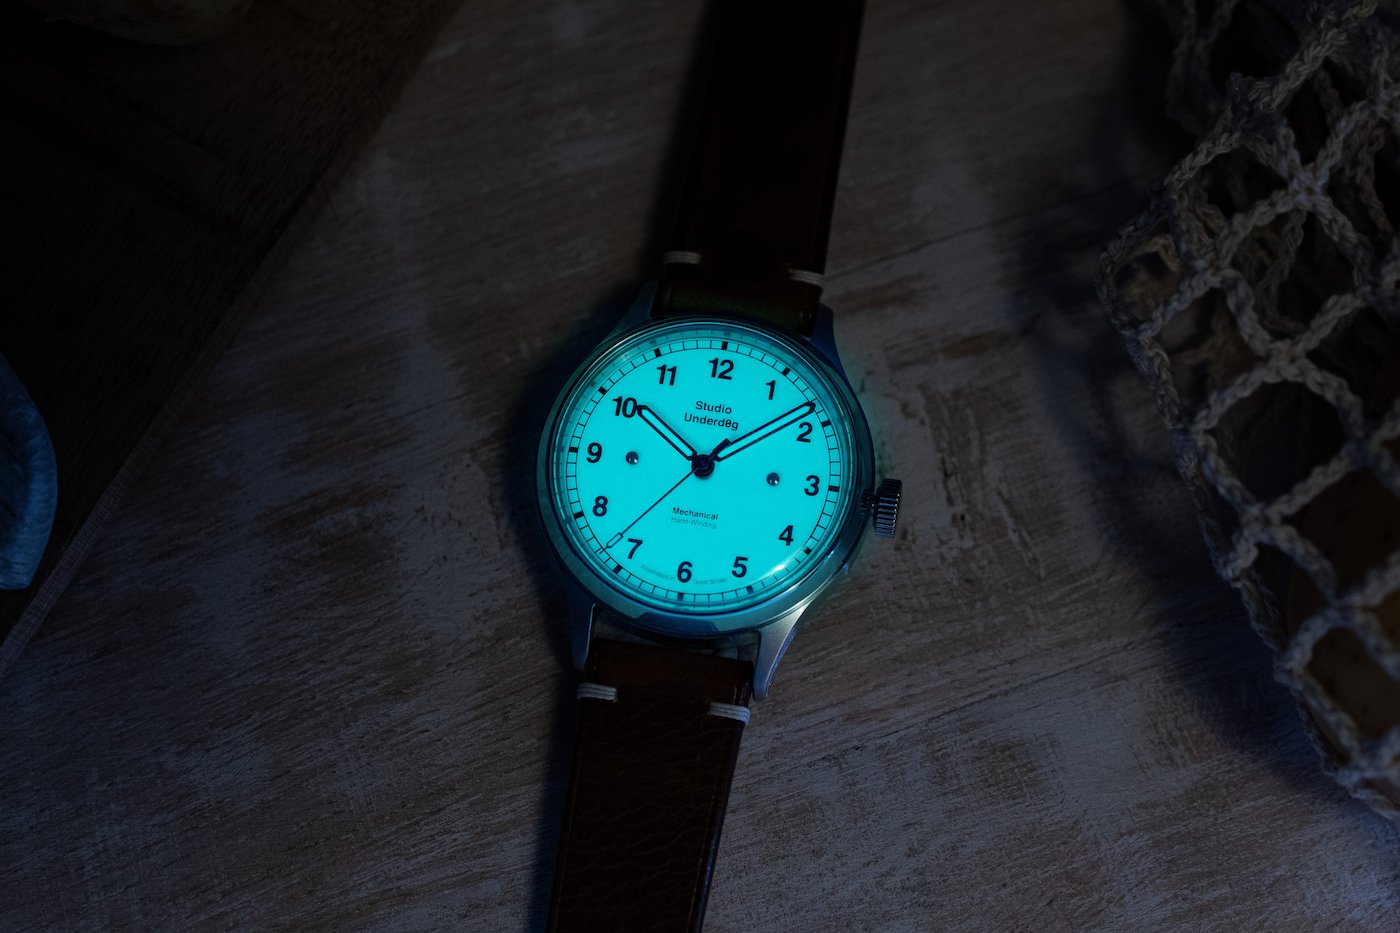 Studio Underd0g releases new field watches with a twist